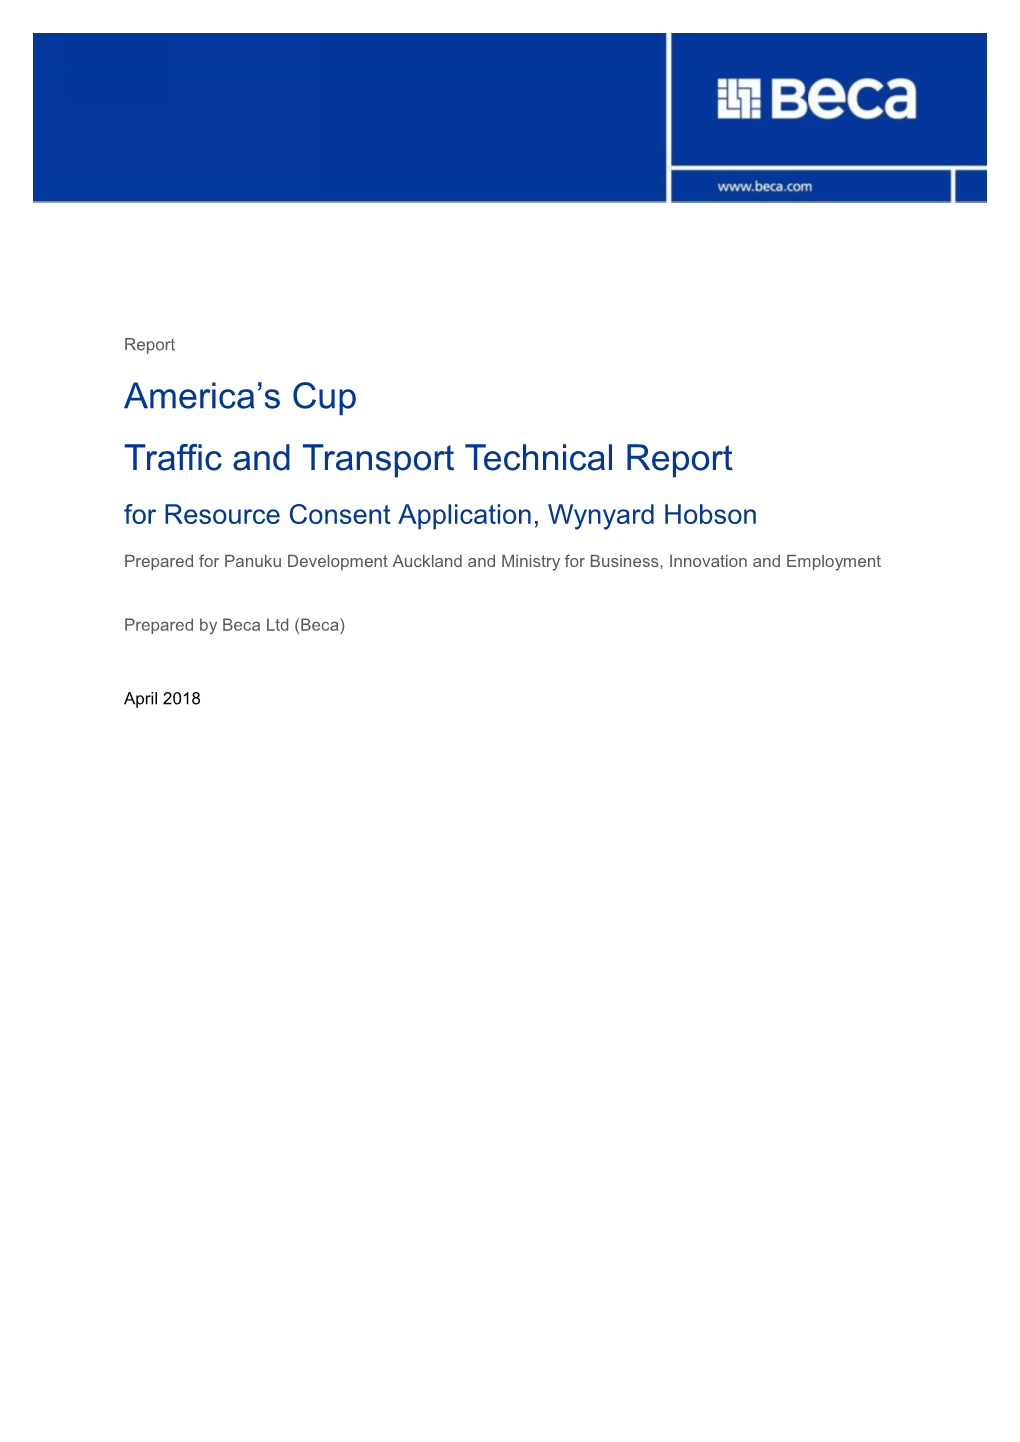 America's Cup Traffic and Transport Technical Report